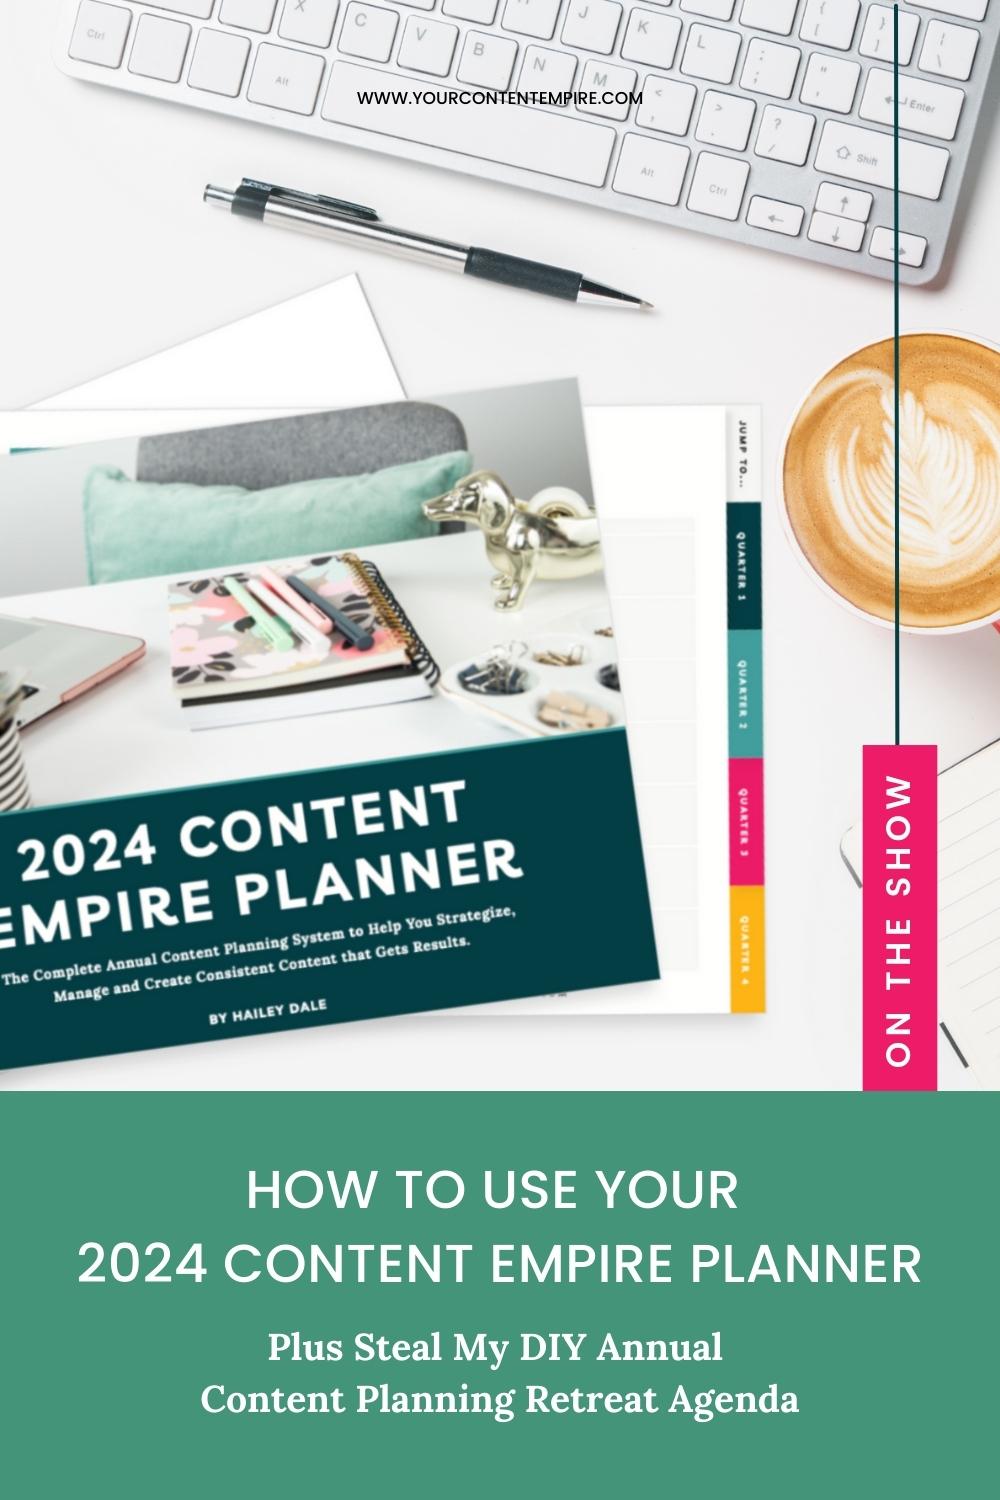 Episode 9 - How to Use Your 2024 Content Empire Planner by Your Content Empire